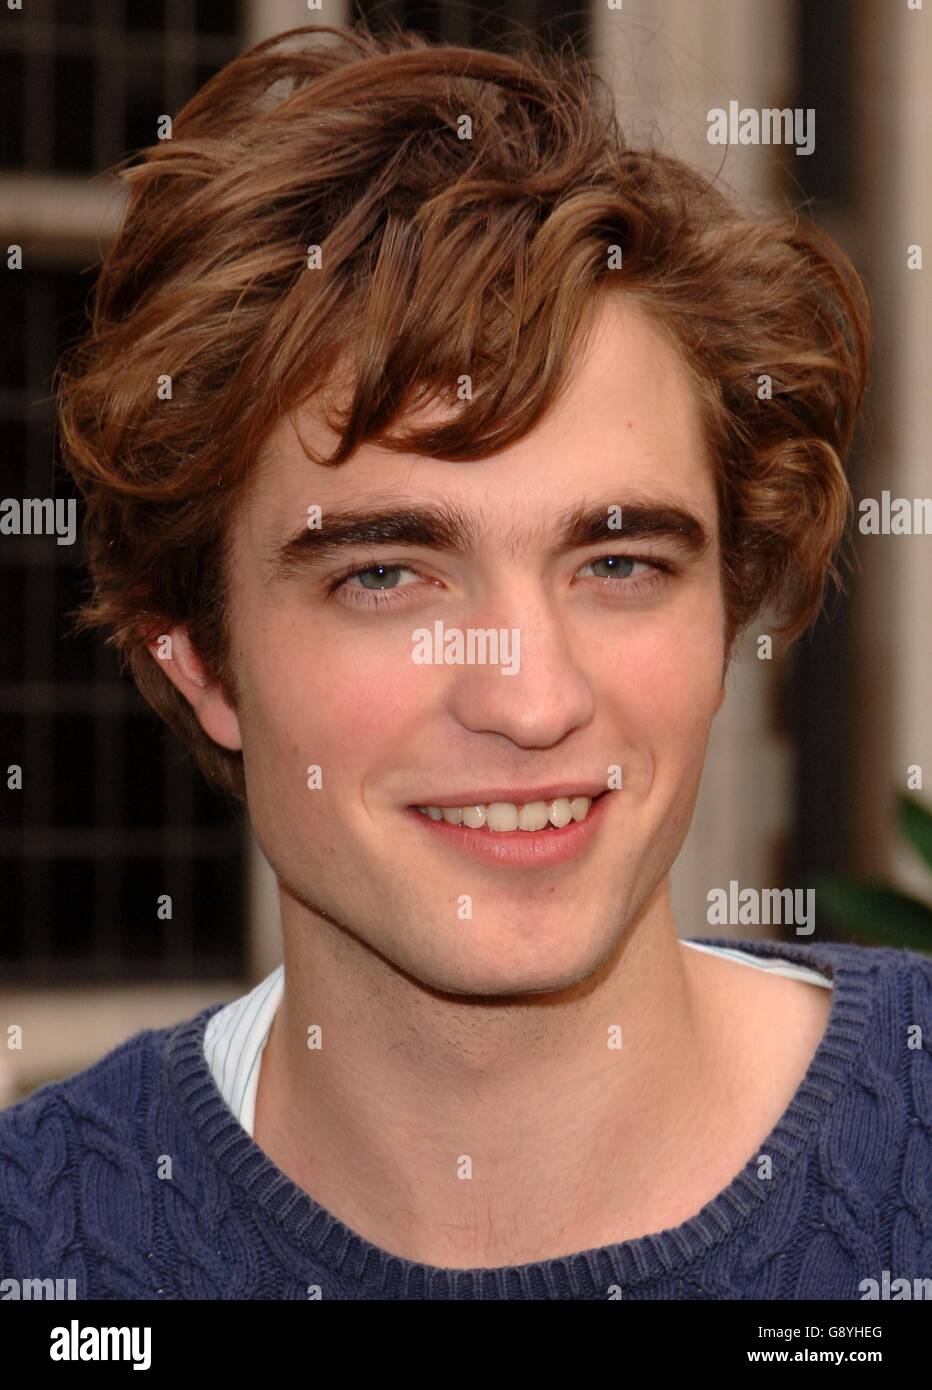 Actor Robert Pattinson (Cedric Diggory) from Sedgwick during a photocall for the new Harry Potter film, 'Harry Potter and the Goblet of Fire', at the Merchant Taylor's Hall, central London, Tuesday 25 October 2005. PRESS ASSOCIATION Photo. Photo credit should read: Ian West/PA ... SHOWBIZ Potter ... 25-10-2005 ... London ... UK ... PRESS ASSOCIATION photo. Photo Credit should read: Ian West/PA. Unique Reference No. 2656068 Stock Photo